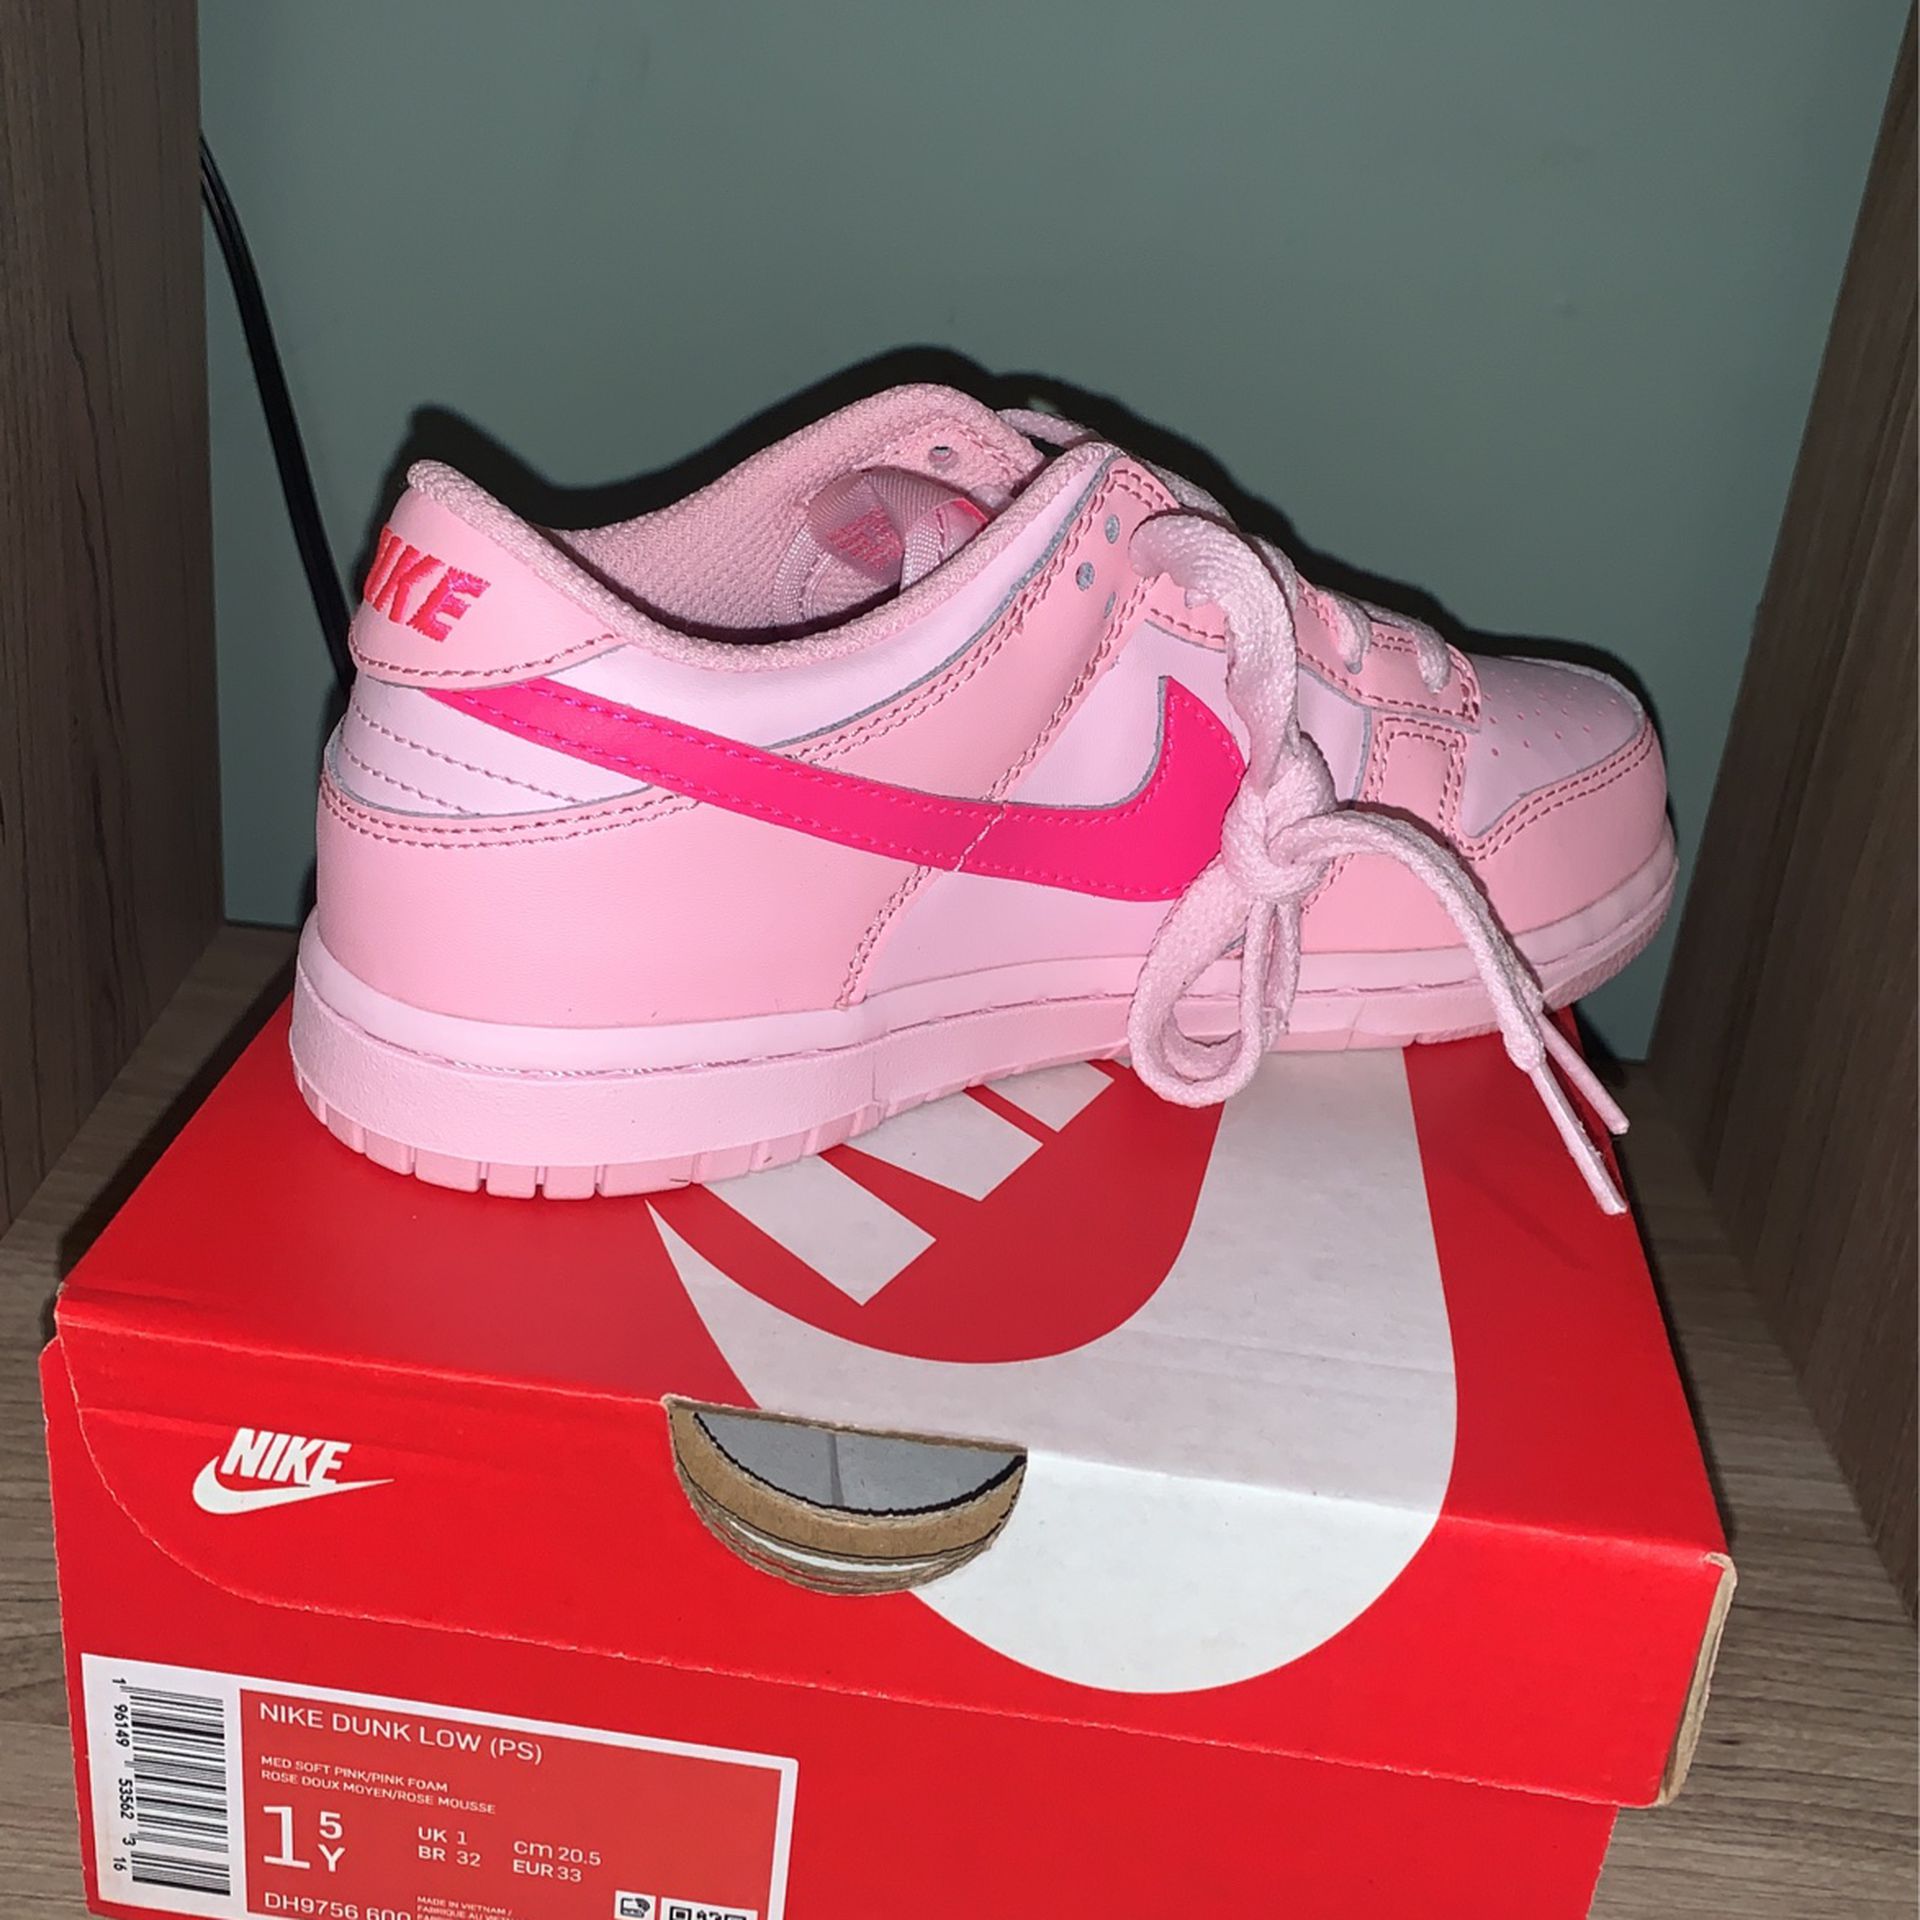 Vandy The Pink “Burger Dunks” Sz 13 for Sale in Providence, RI - OfferUp